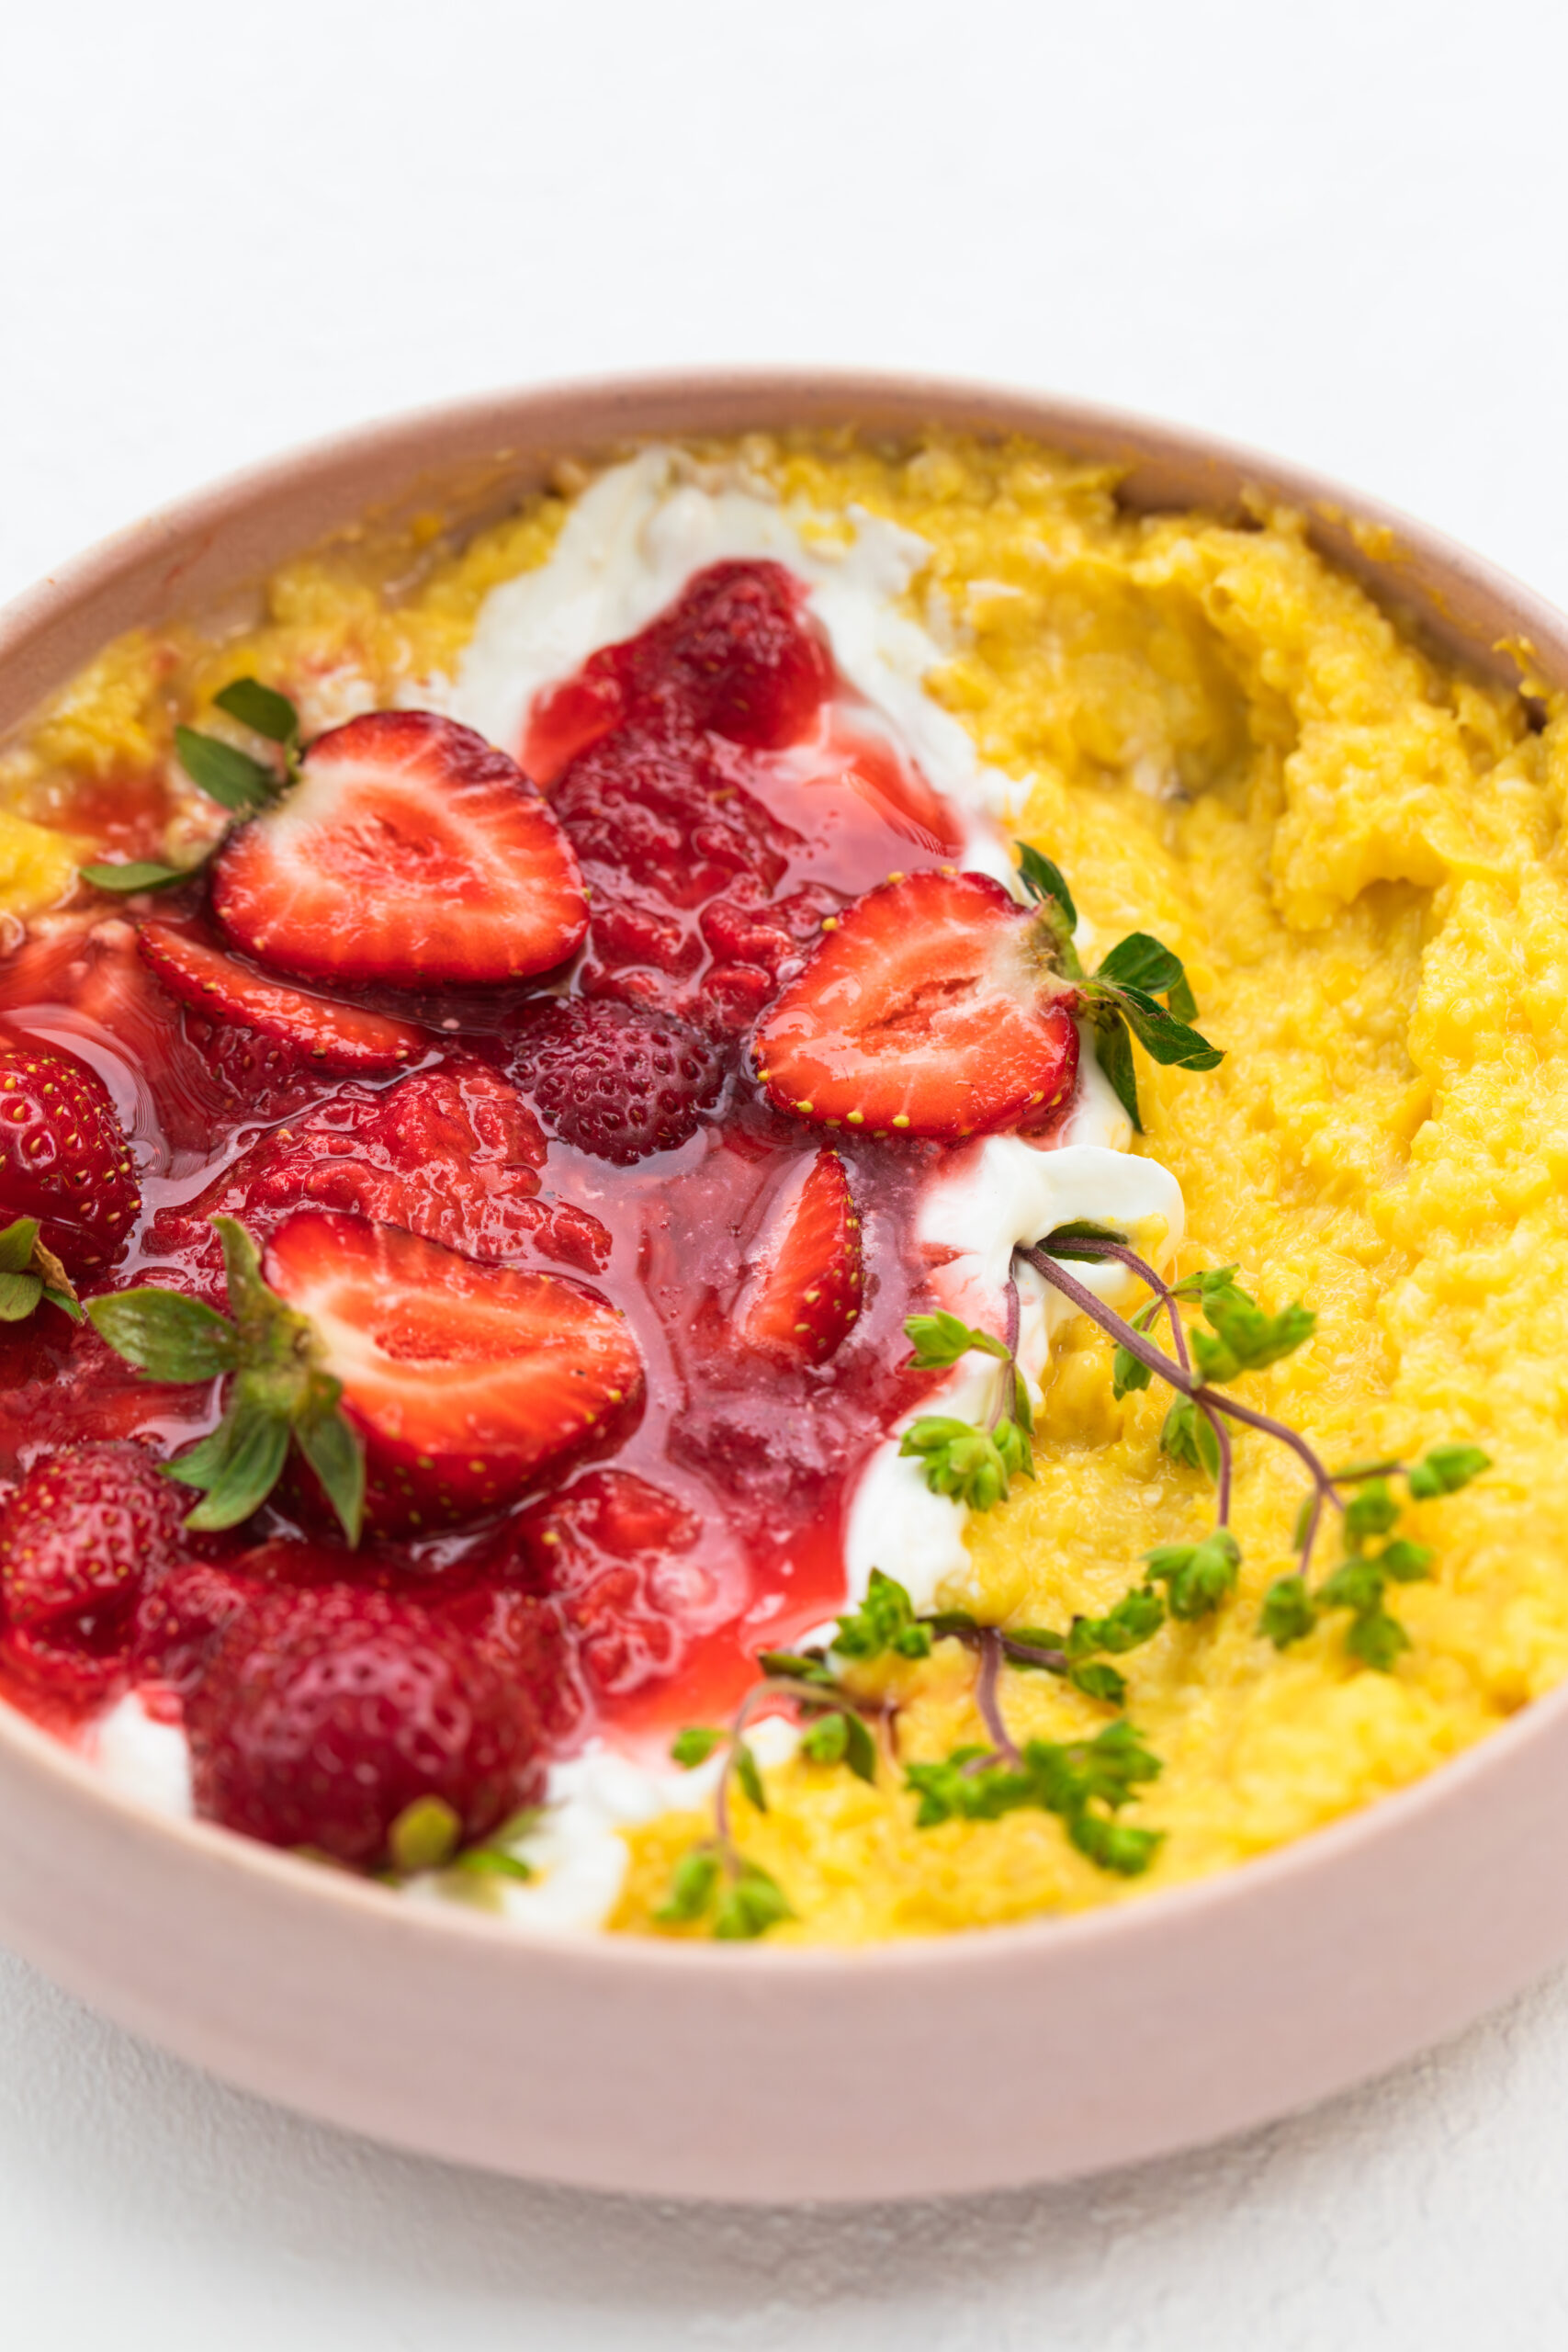 Sweet Corn Polenta with Sour Cream and Crushed Strawberries